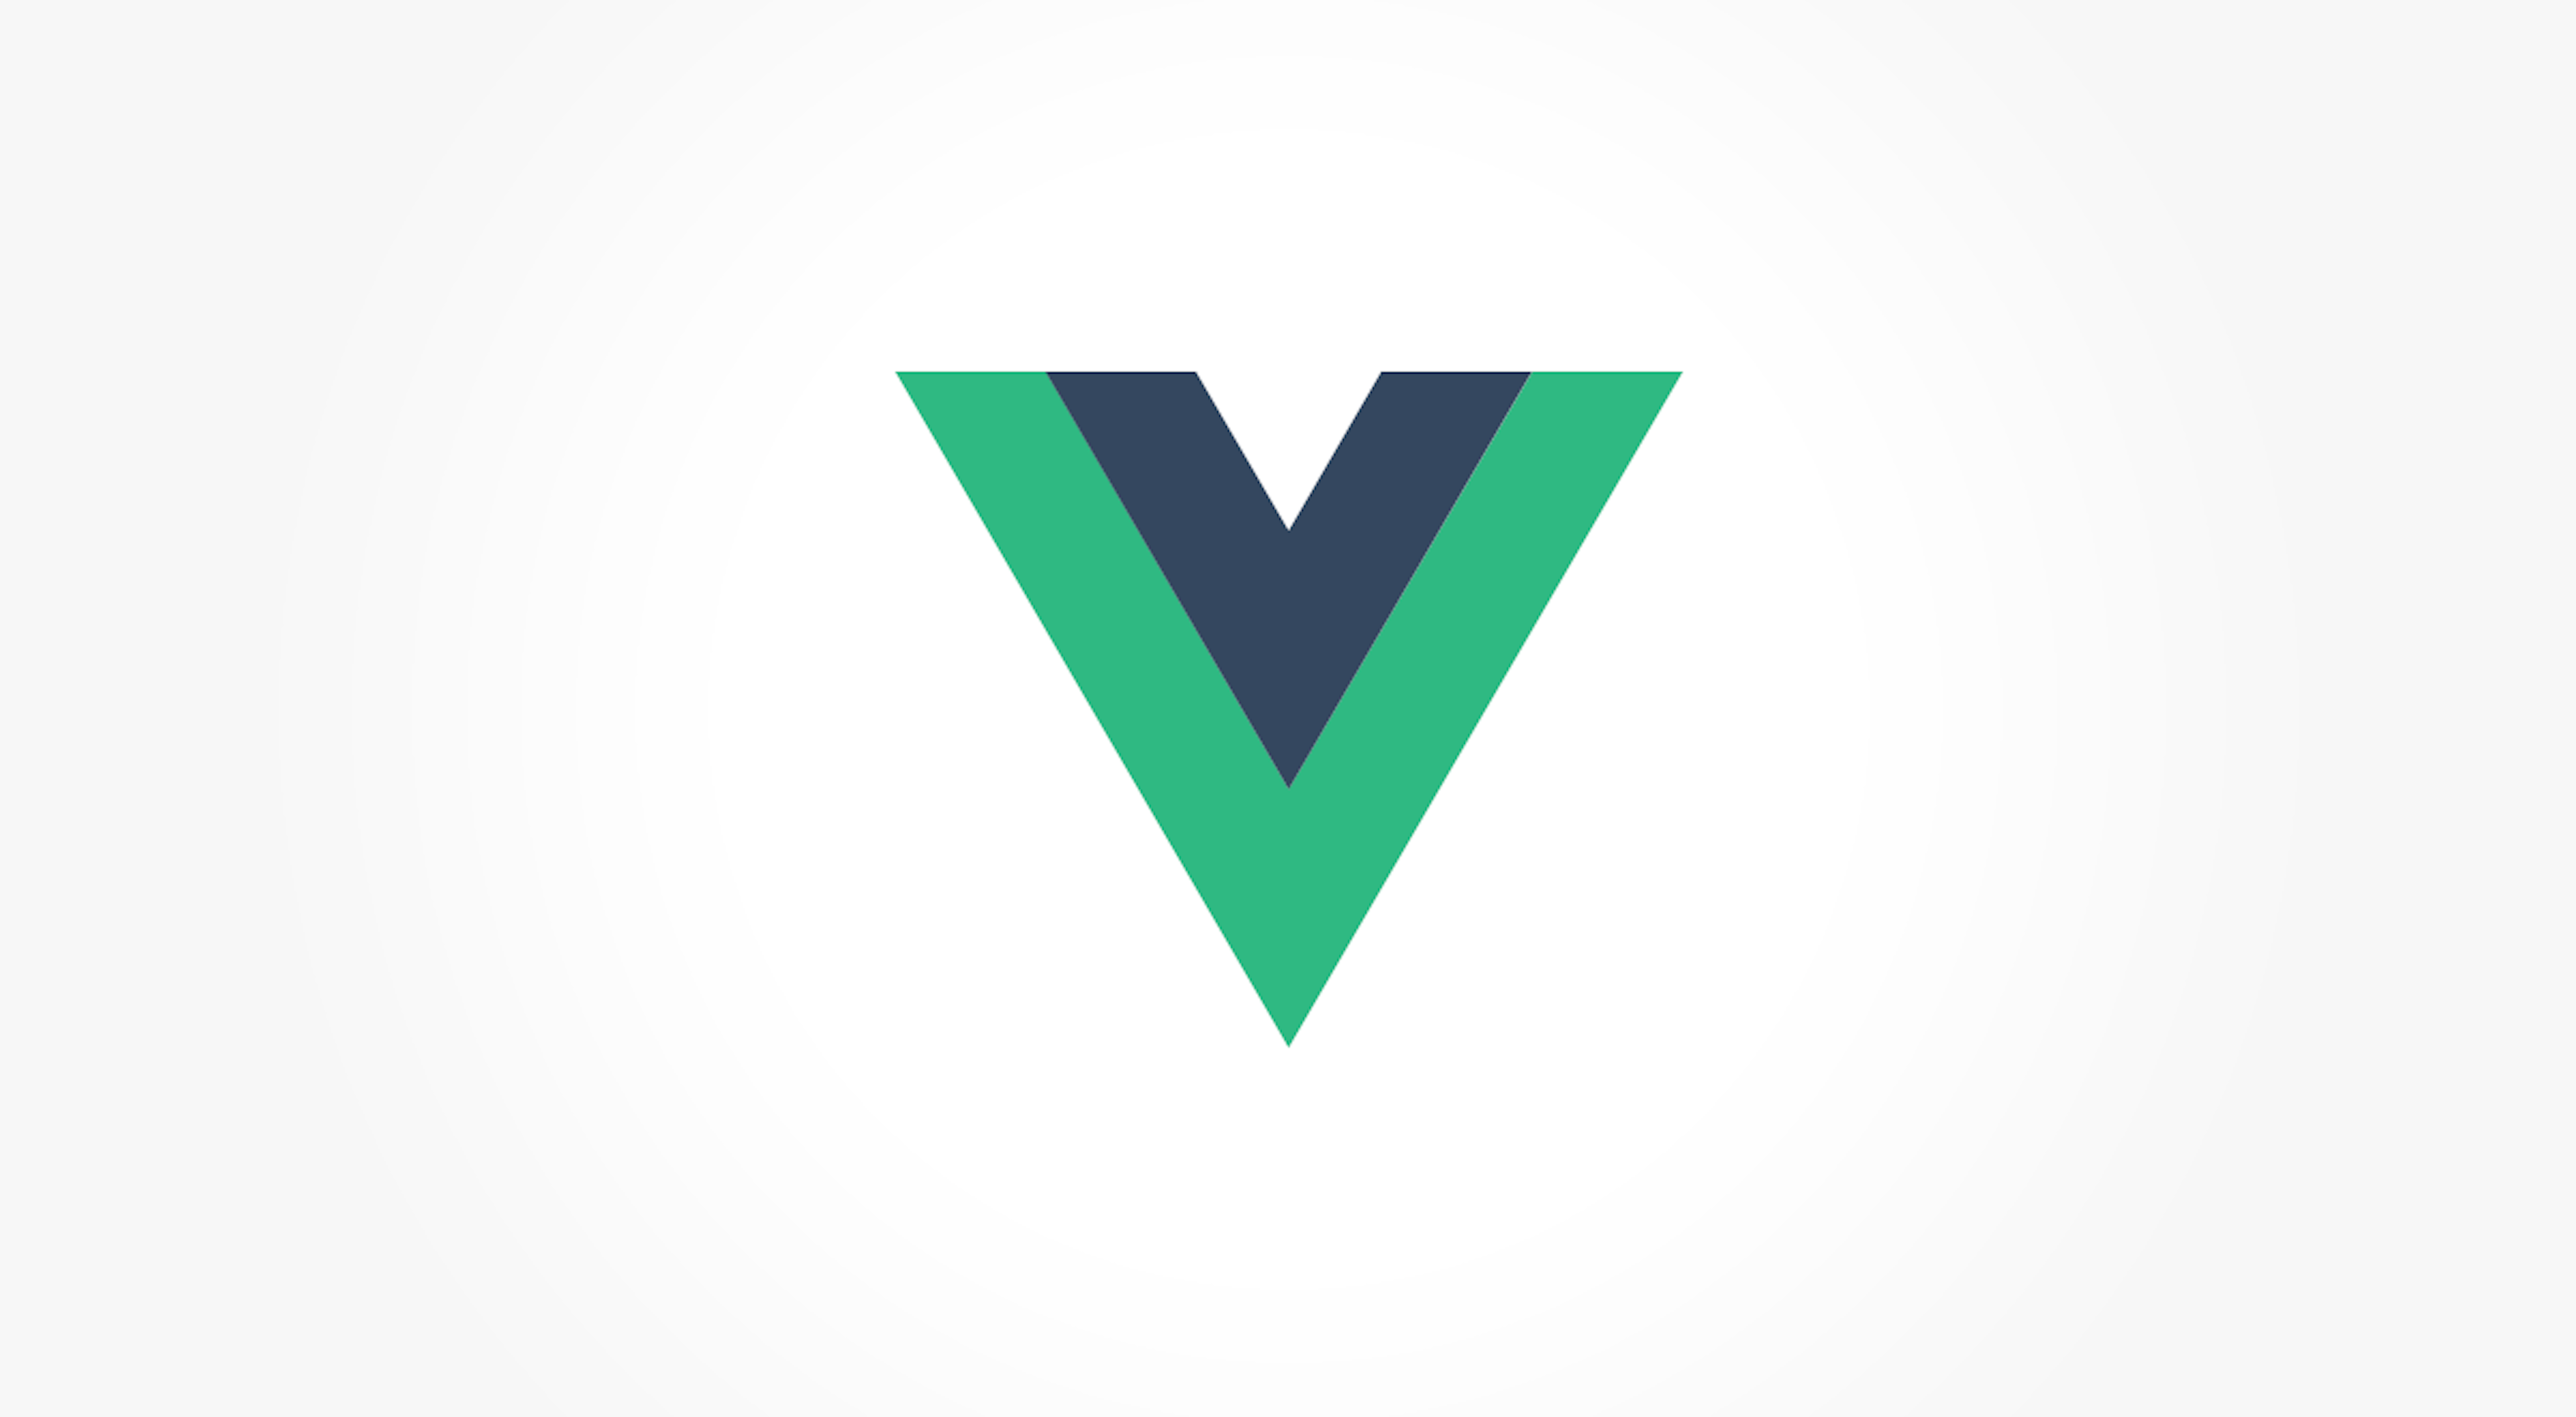 How to make your Vue Js application faster